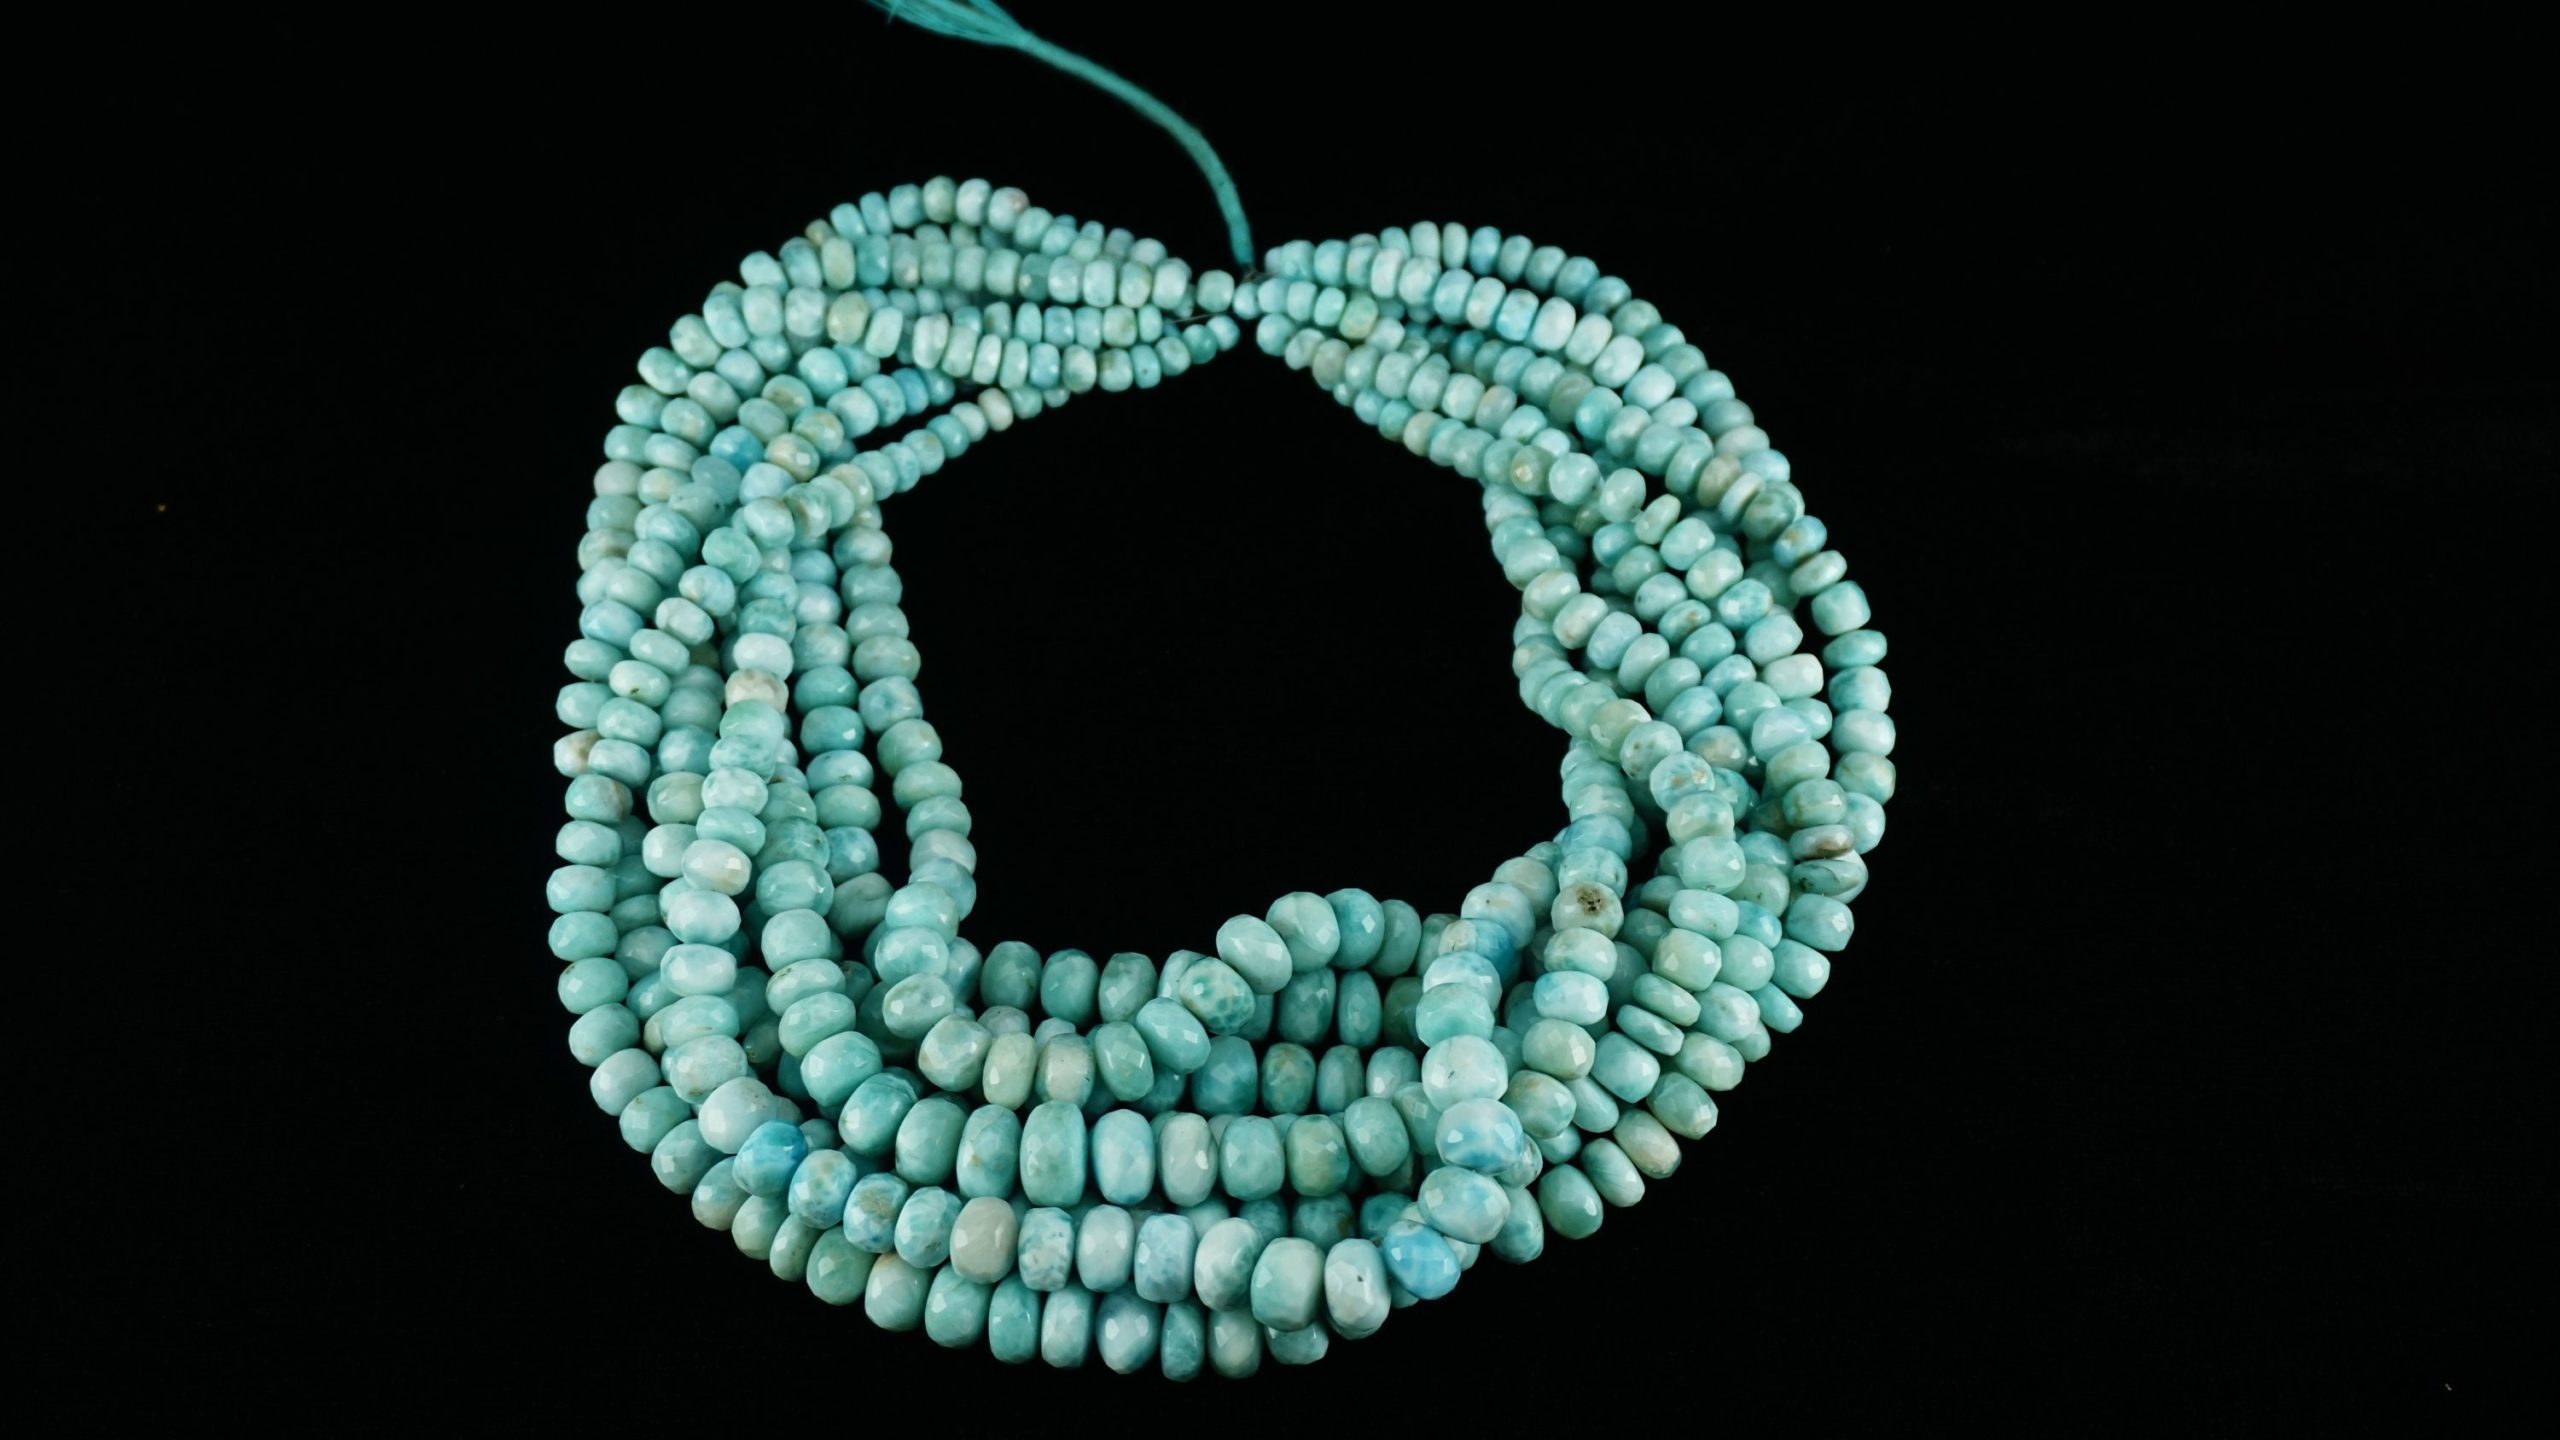 Natural Larimar Faceted Rondelle Beads, 7-8 Mm Blue Larimar Faceted Beads, Large Size Domnican Larimar Rondelle Beads For Jewelry Making